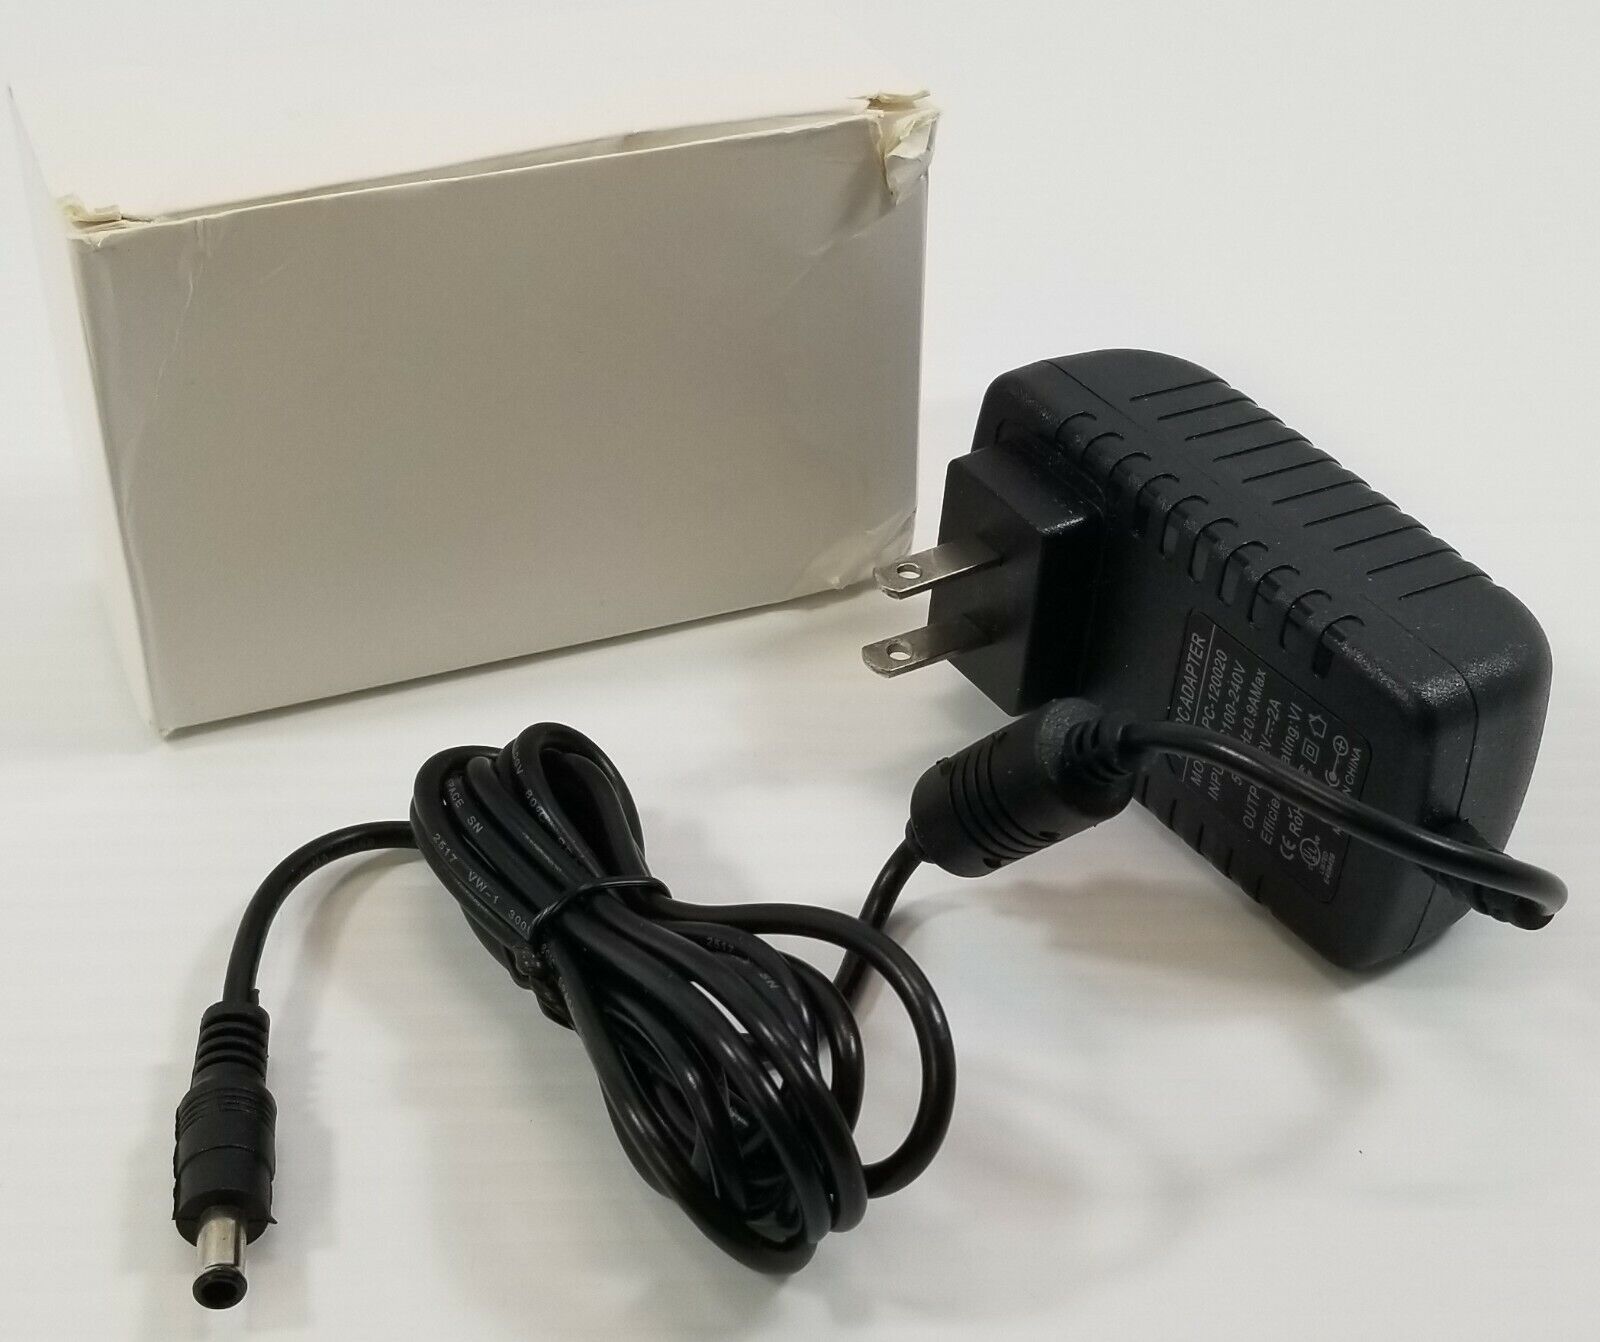 AC DC Adapter Model: PC-120020 Charger C Electrical Supply 【国内在庫】 2021高い素材 Power